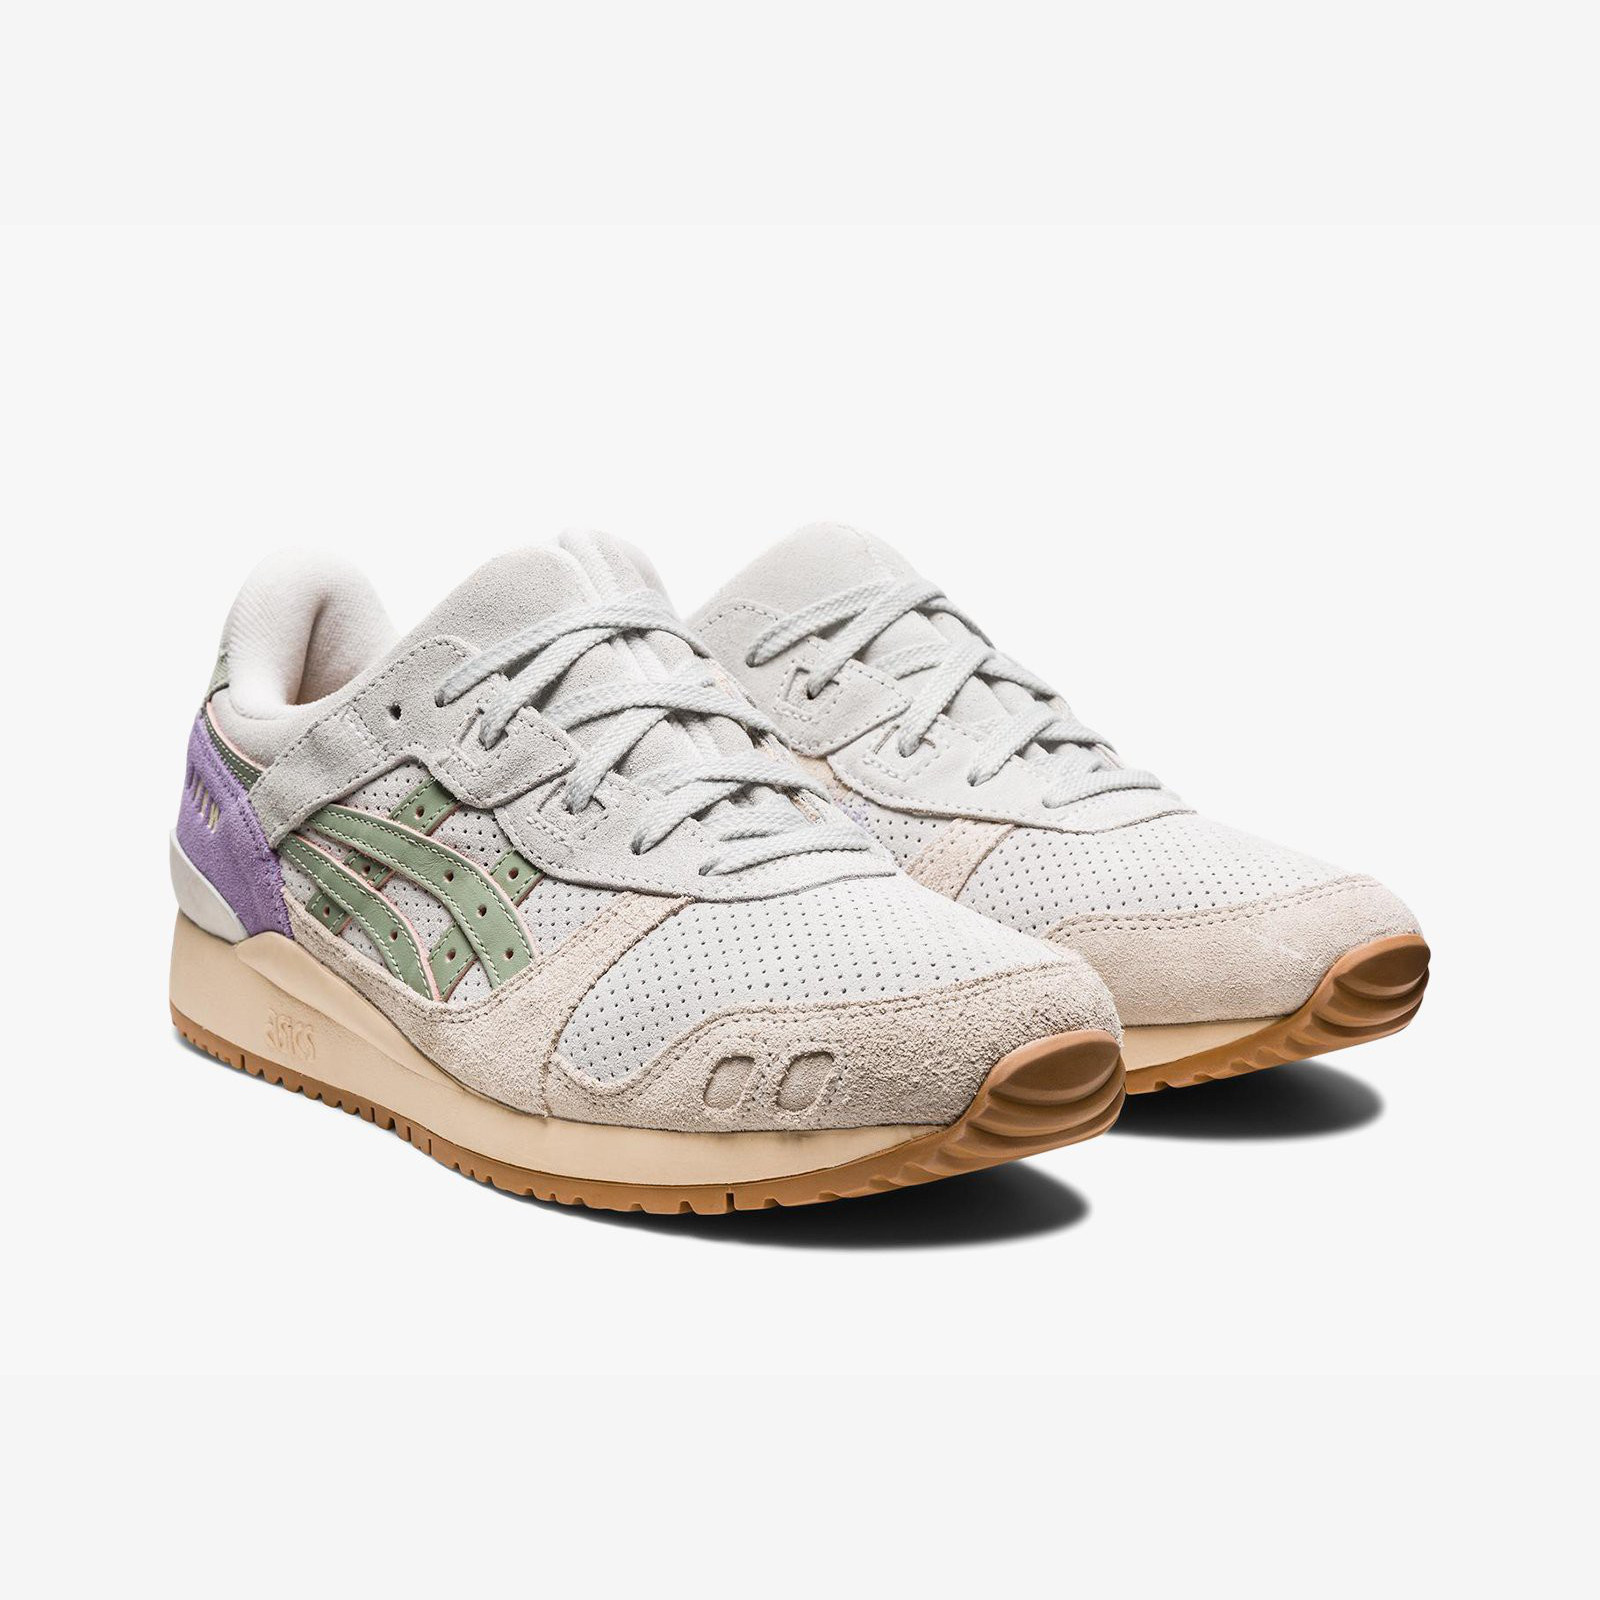 Afew x Asics
Gel-Lyte 3
Beauty Of Imperfection